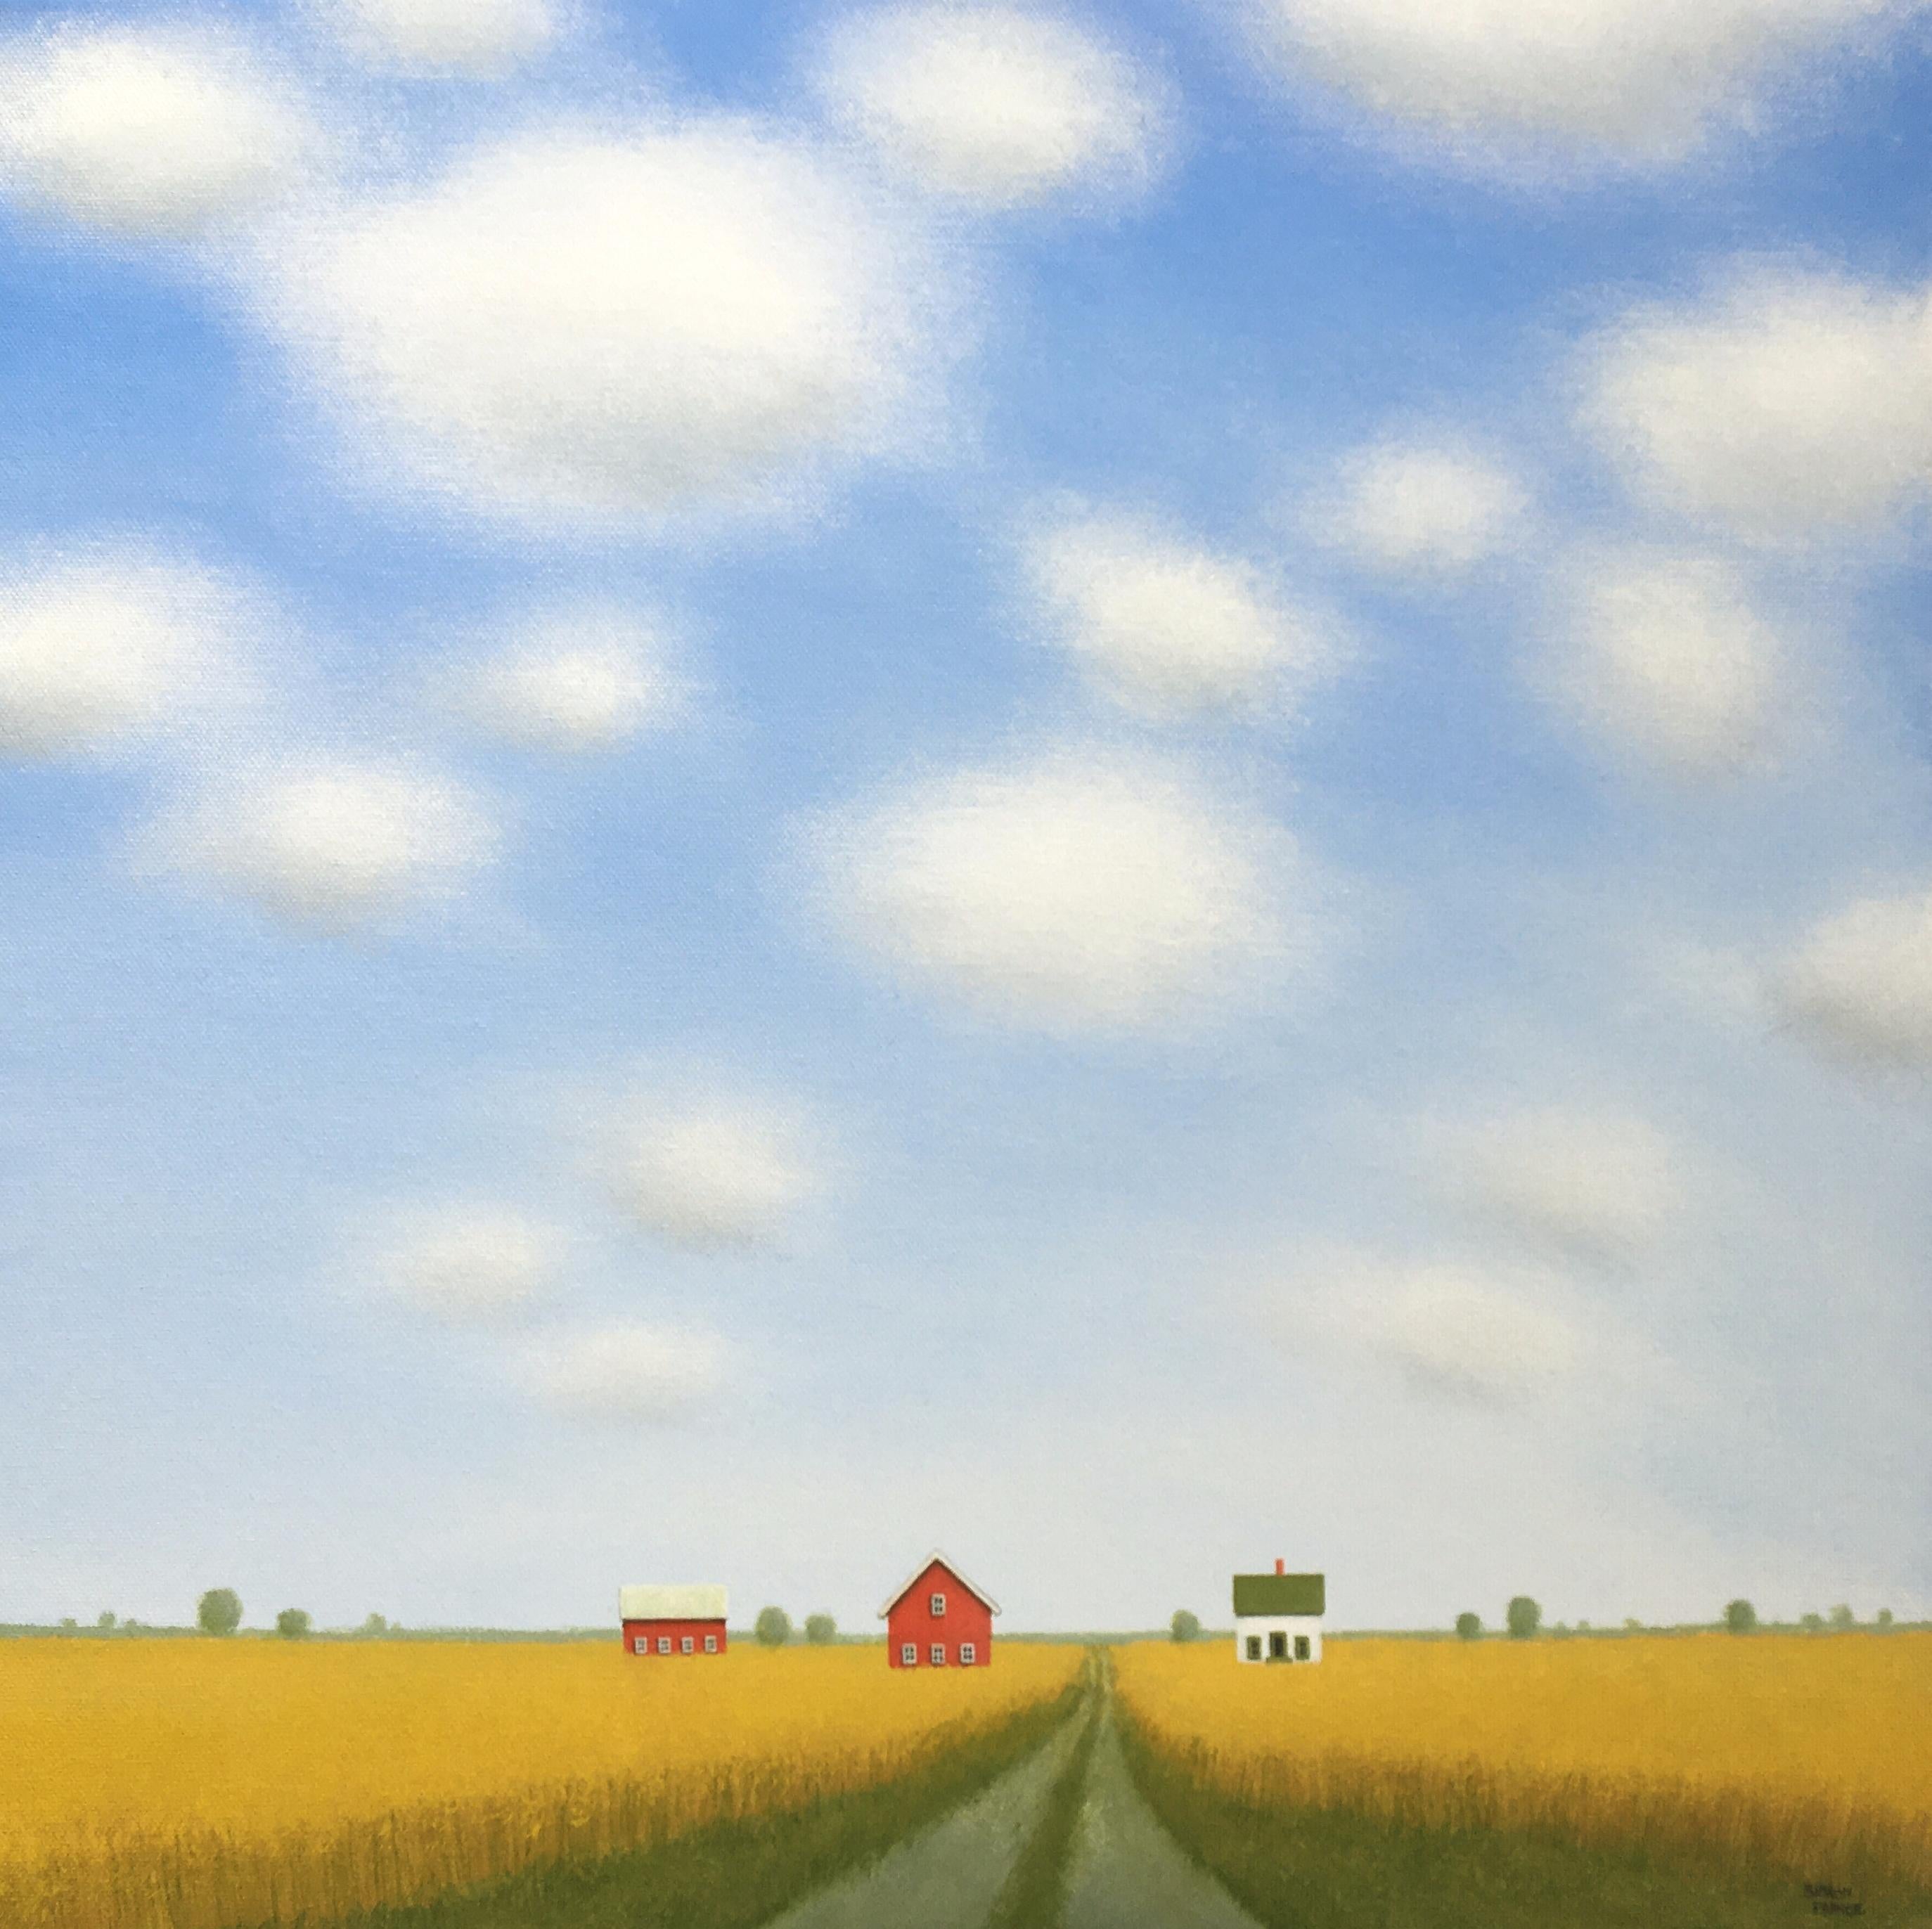 Road Past the Old Farm, Original Painting